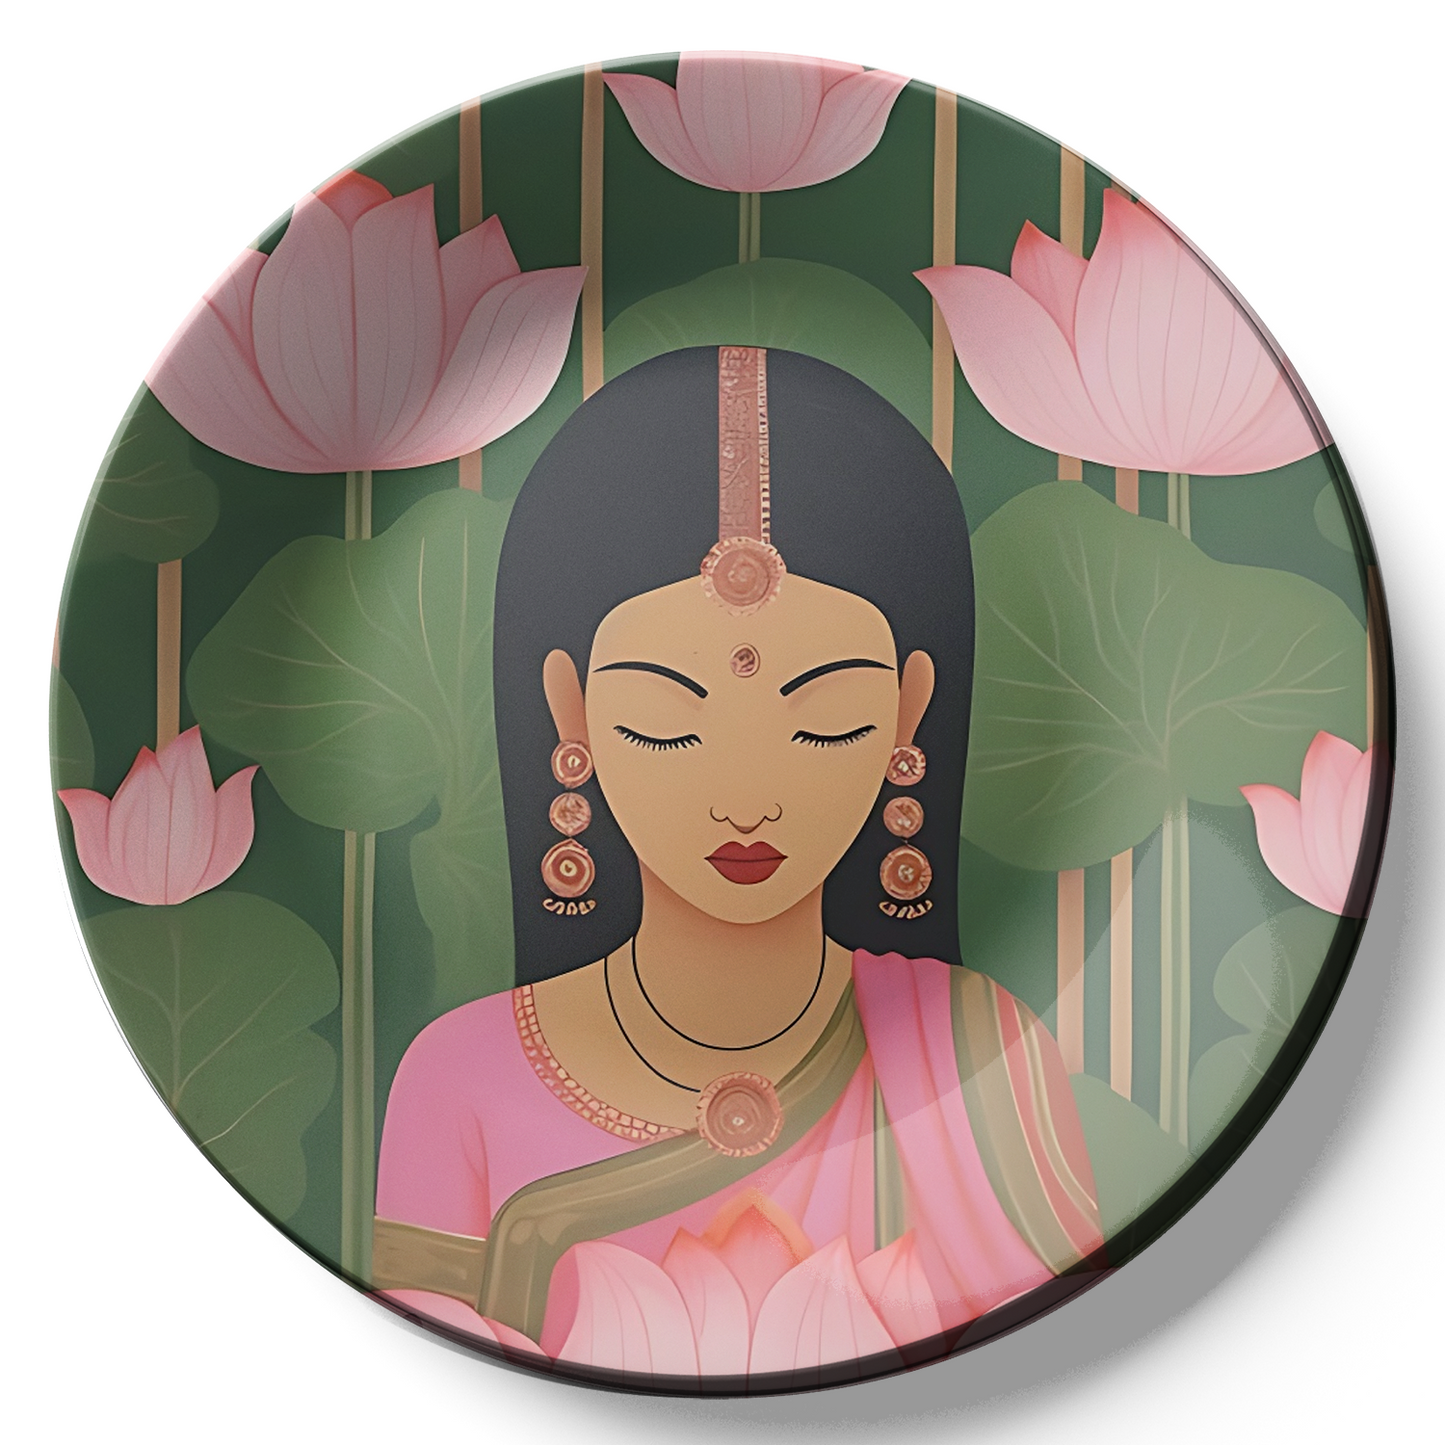 Exquisite portrayal of Indian culture on ceramic wall plate 